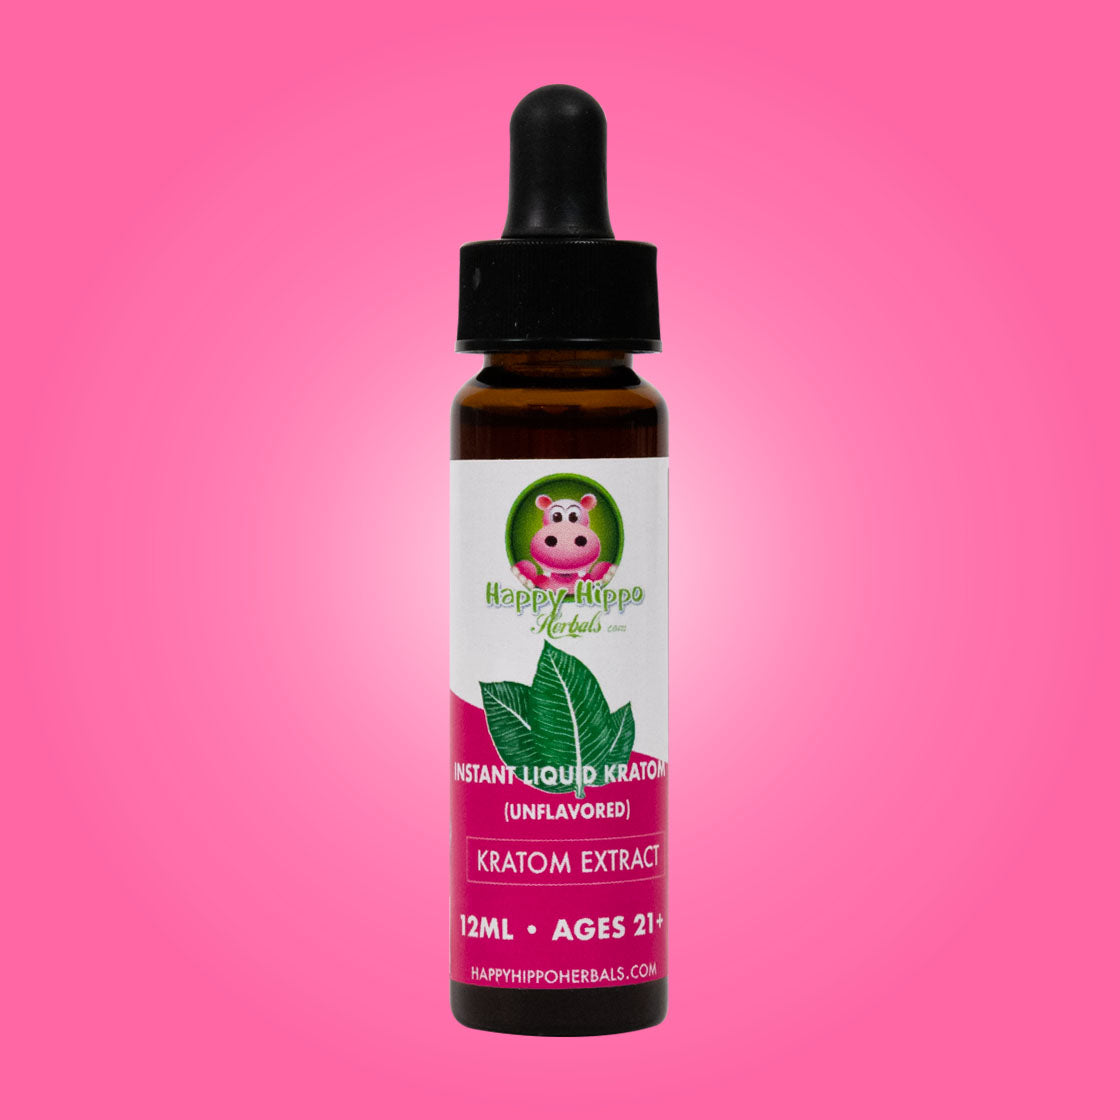 Product Image depicting Instant Liquid Kratom Extract in dropper bottle - Unflavored